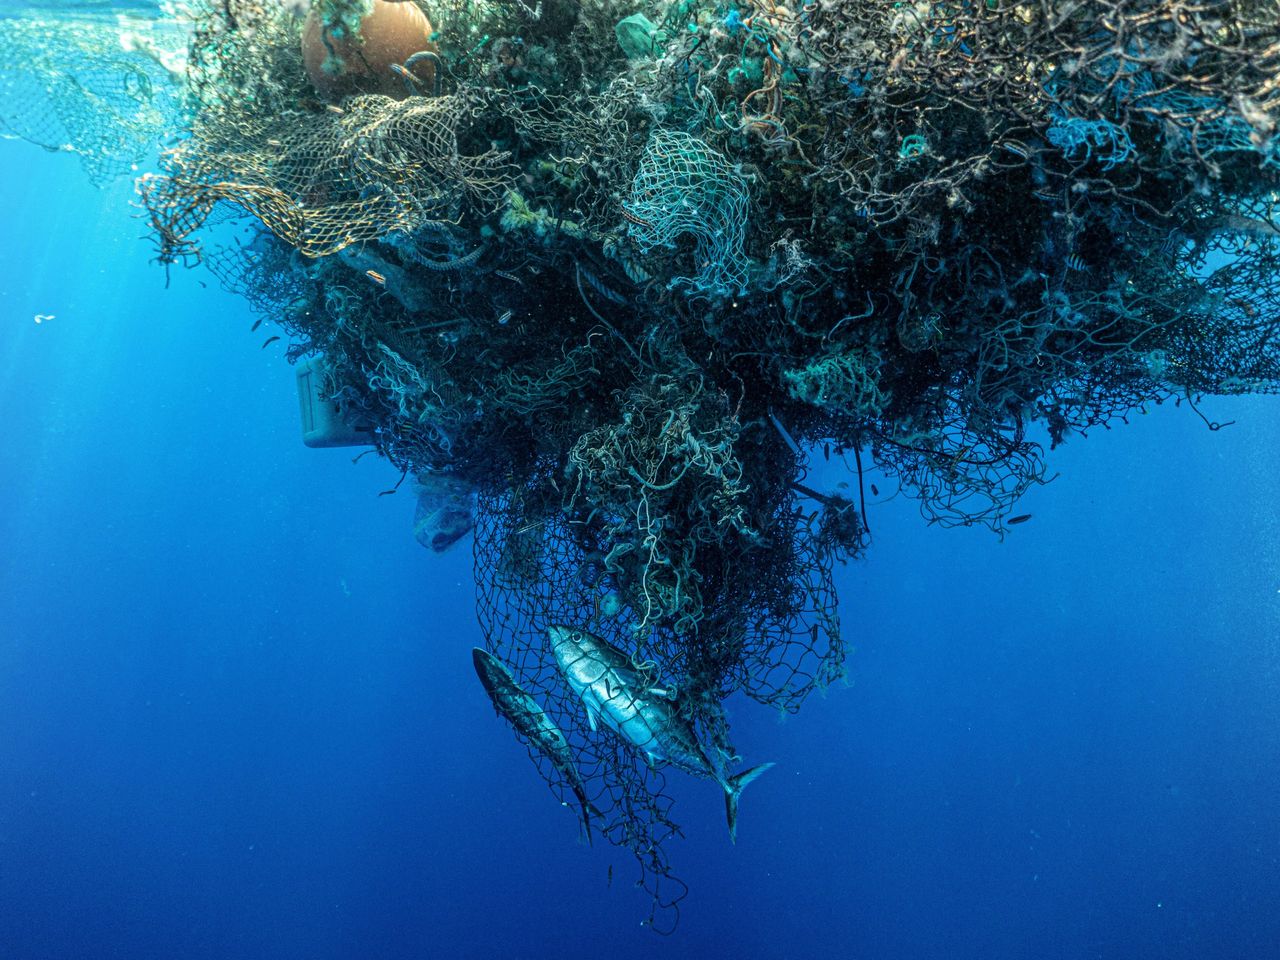 Abandoned fishing nets are the main source of plastic pollution in the Pacific Ocean.